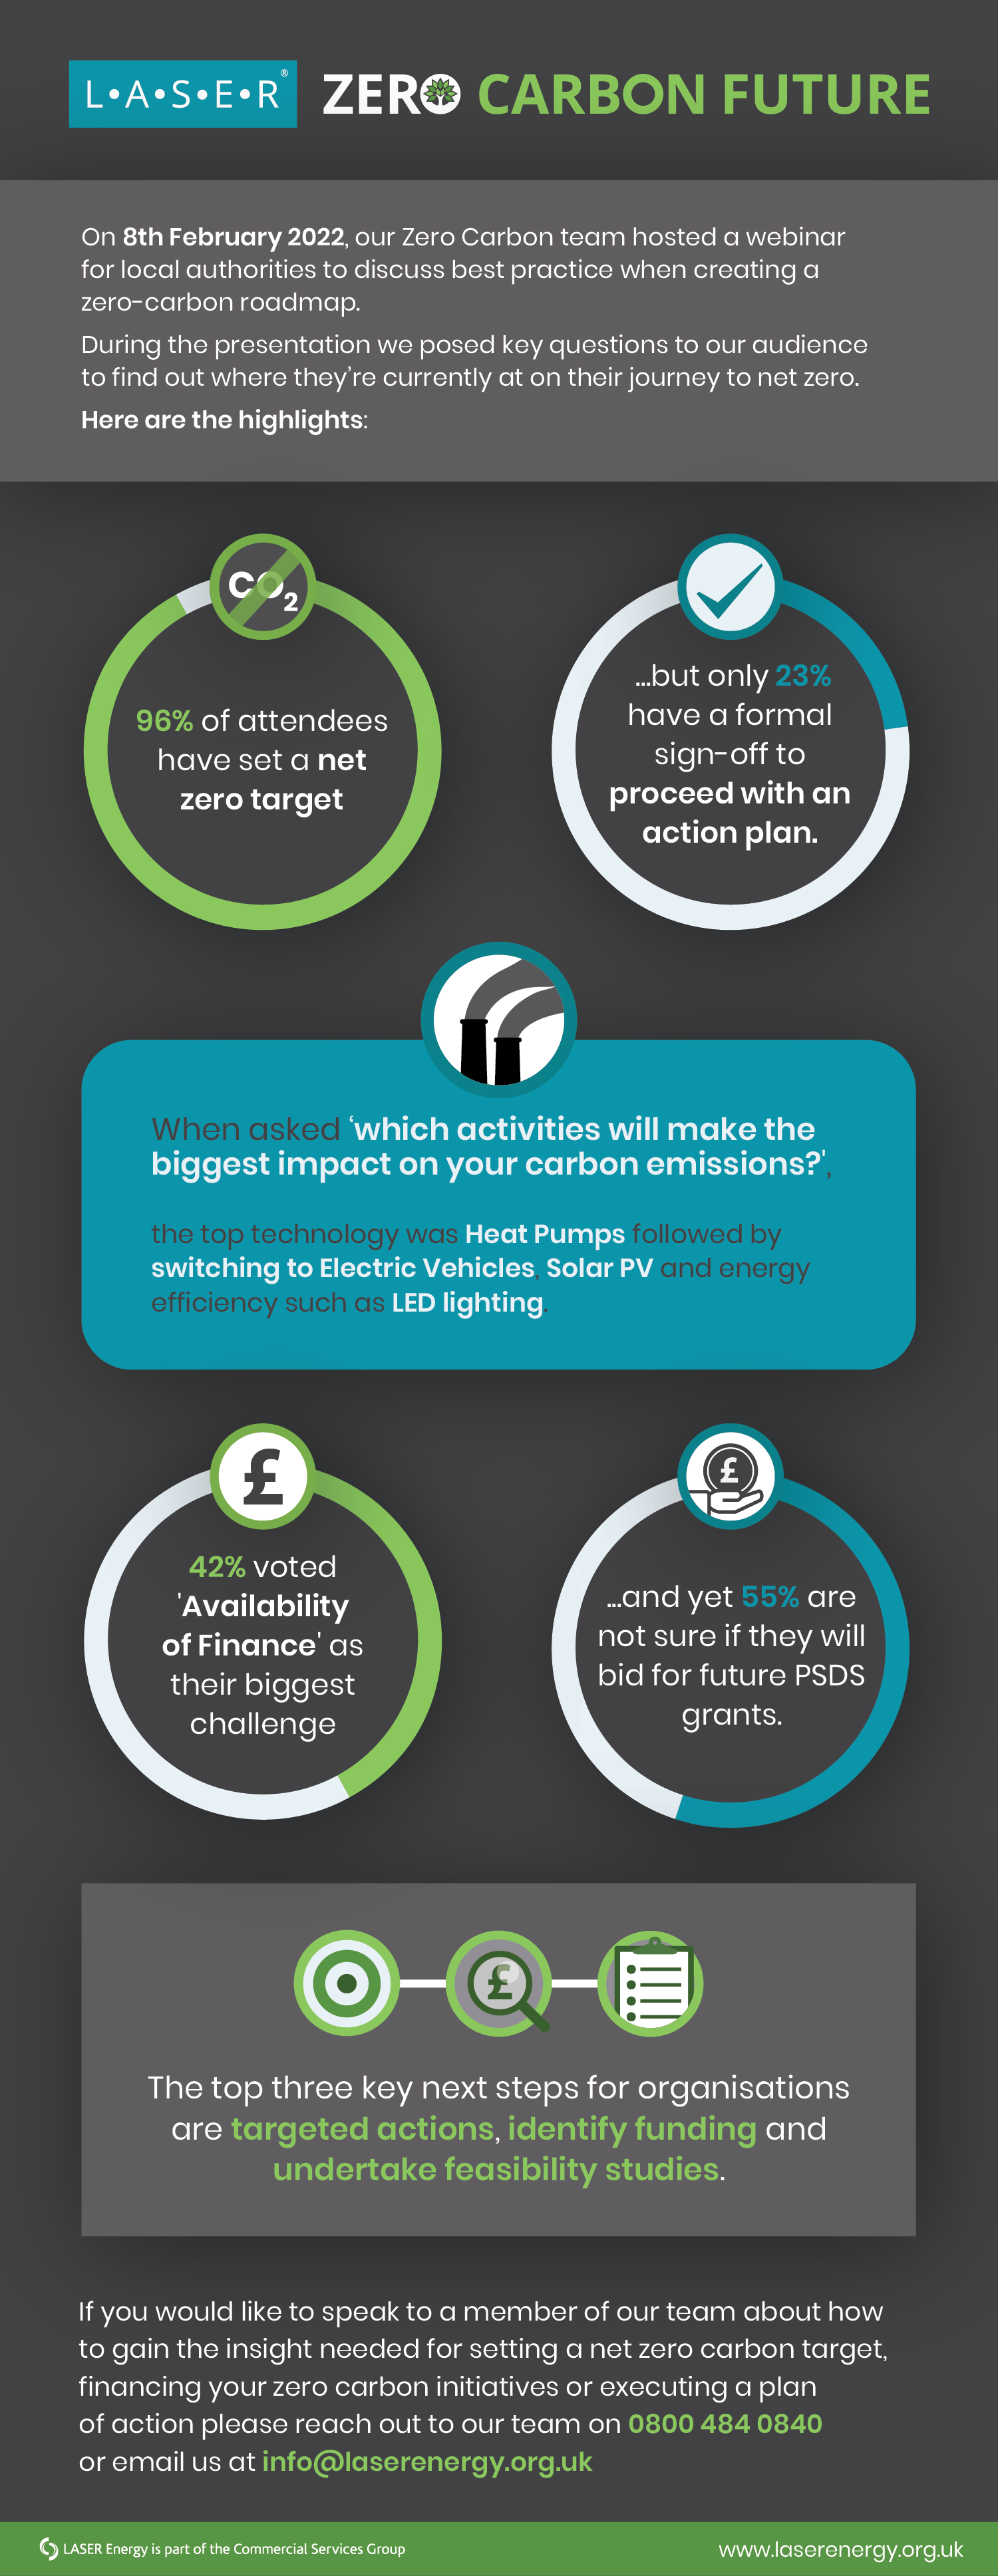 Image shows infographic in greens, black and grey sharing insights and results from our webinar.